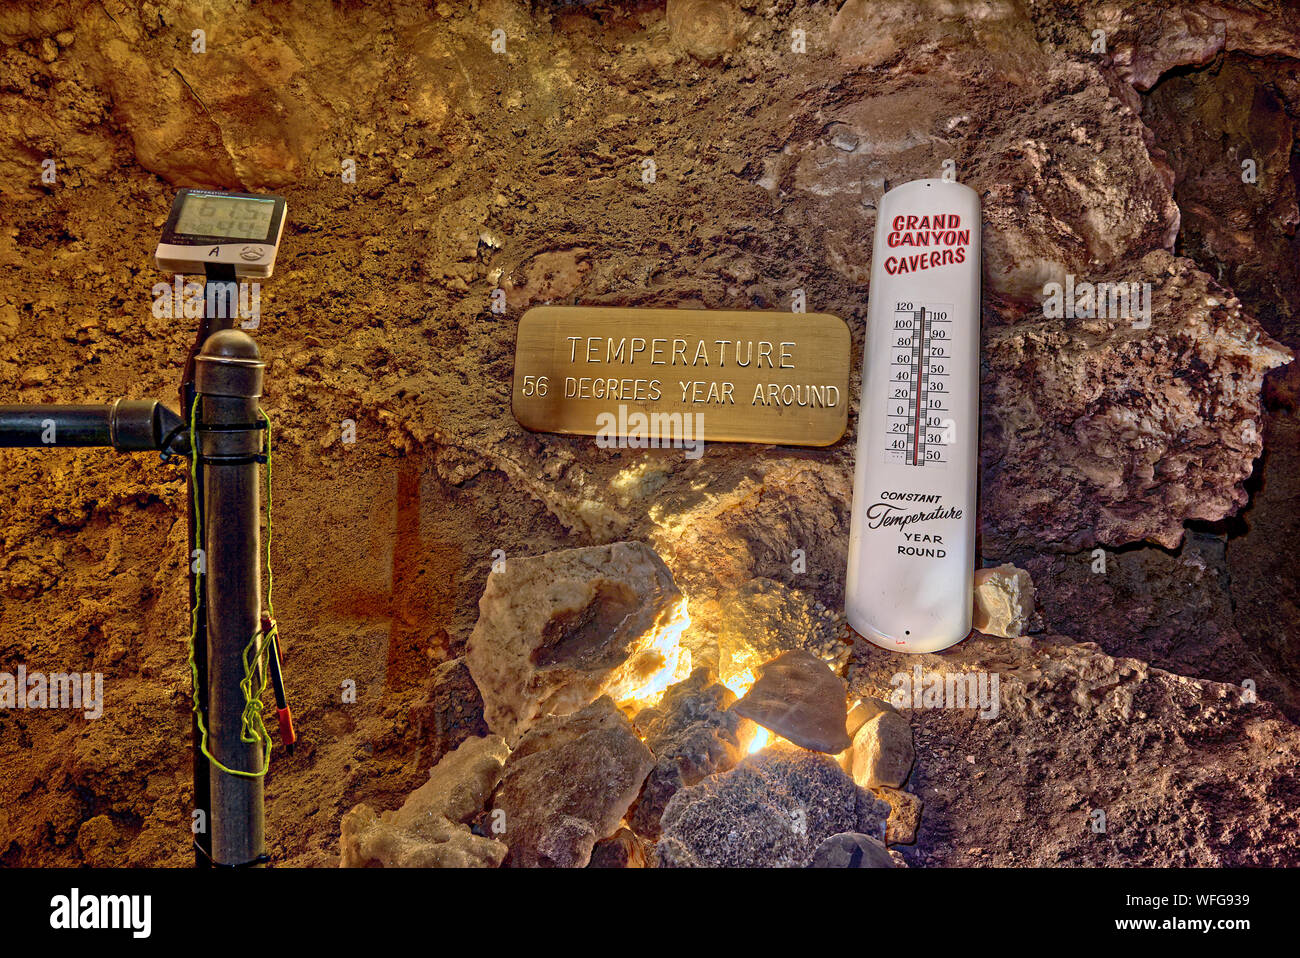 Thermometer zeigt die Temperatur in den Grand Canyon Caverns, Peach Springs, Mile Marker 115, California, United States Stockfoto